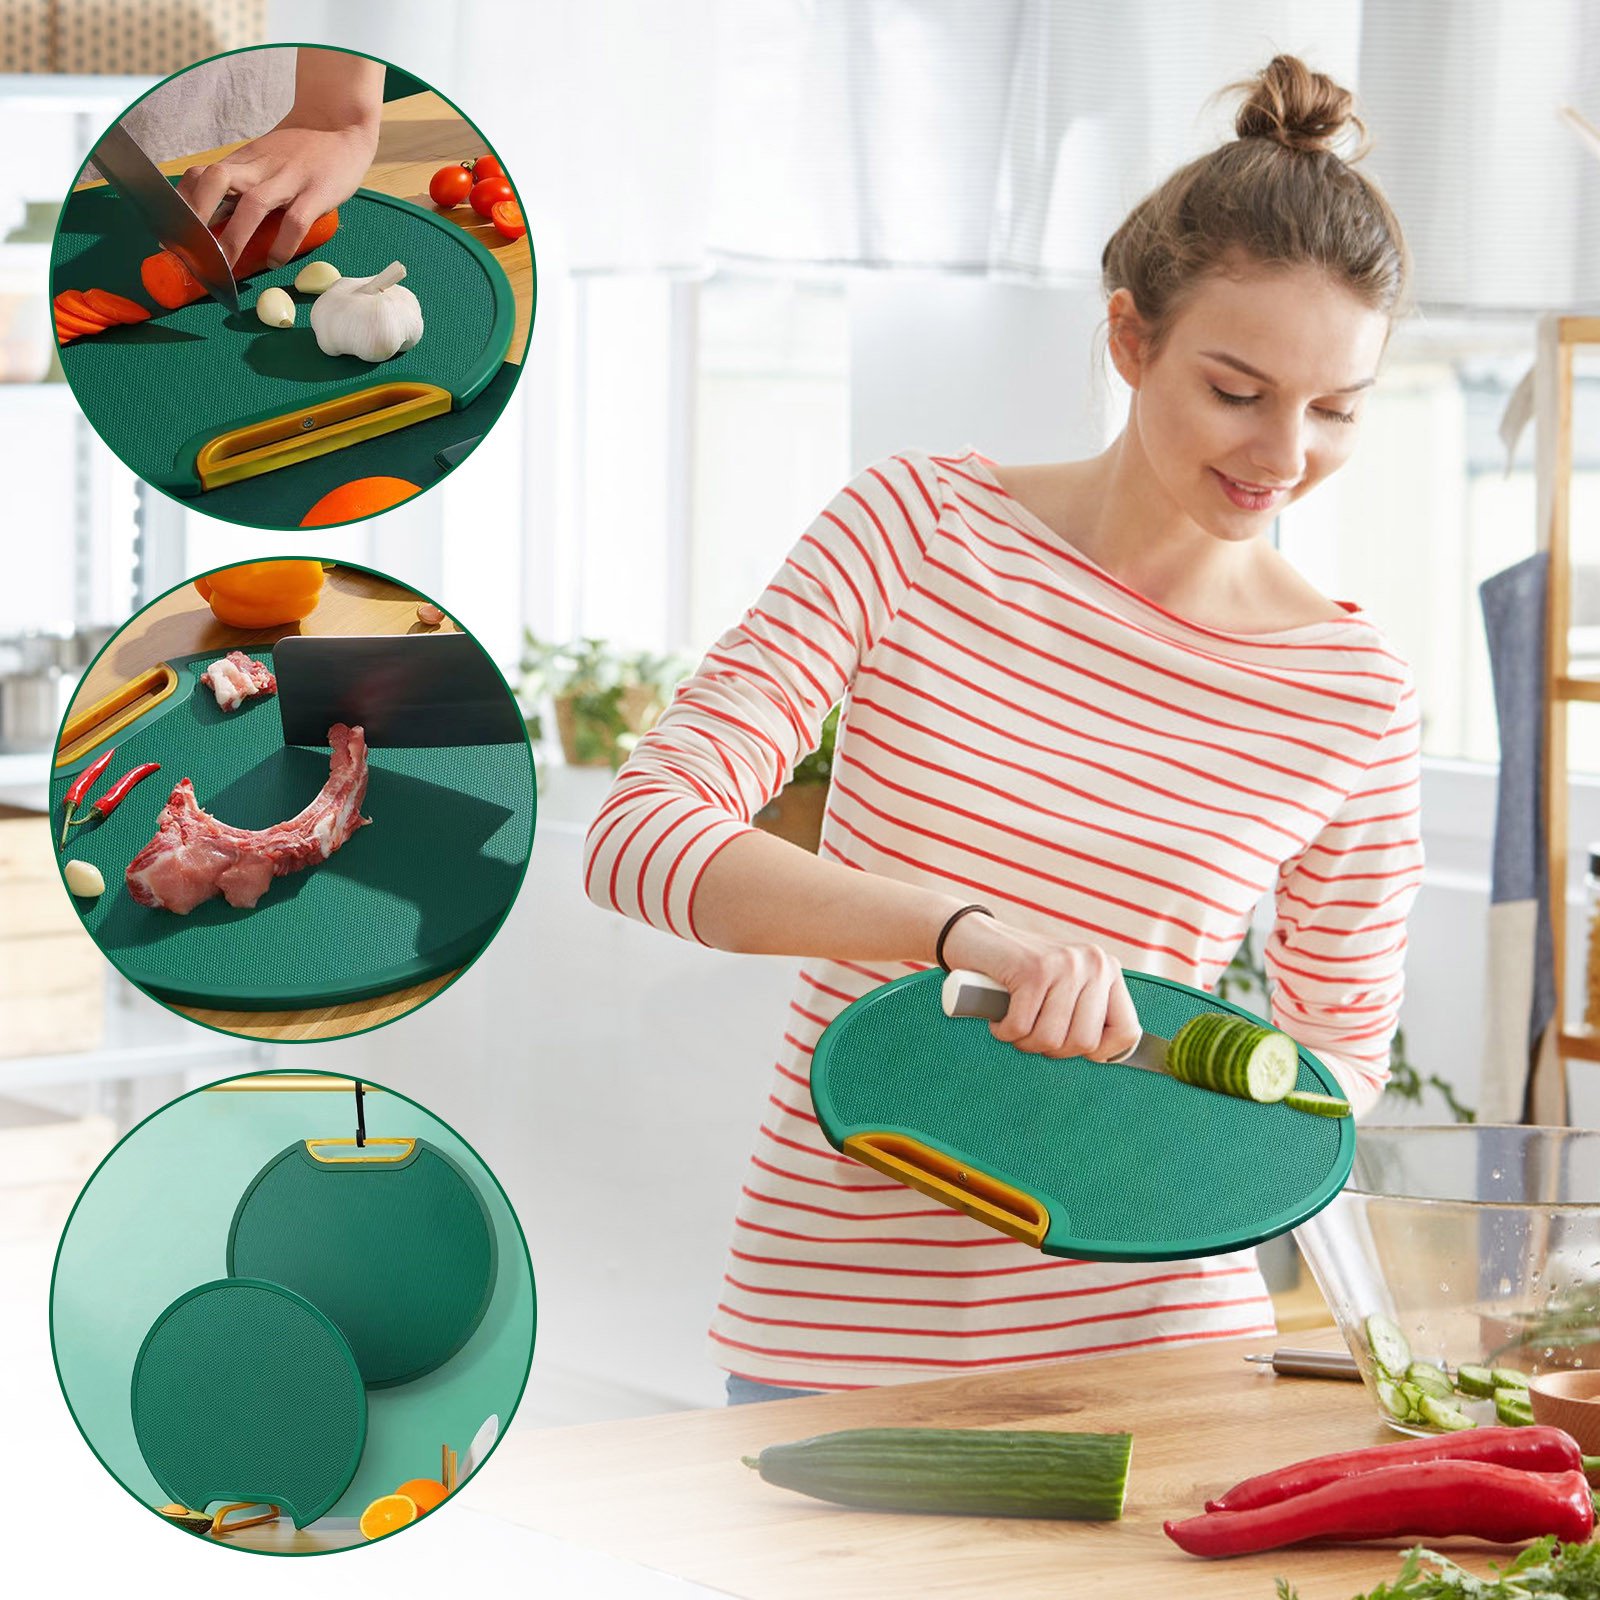 Rush Professional Plastic Cutting Board, Non-Slip Round HDPE Chopping Board  for Meat, Vegetable (Dark Green) S820 